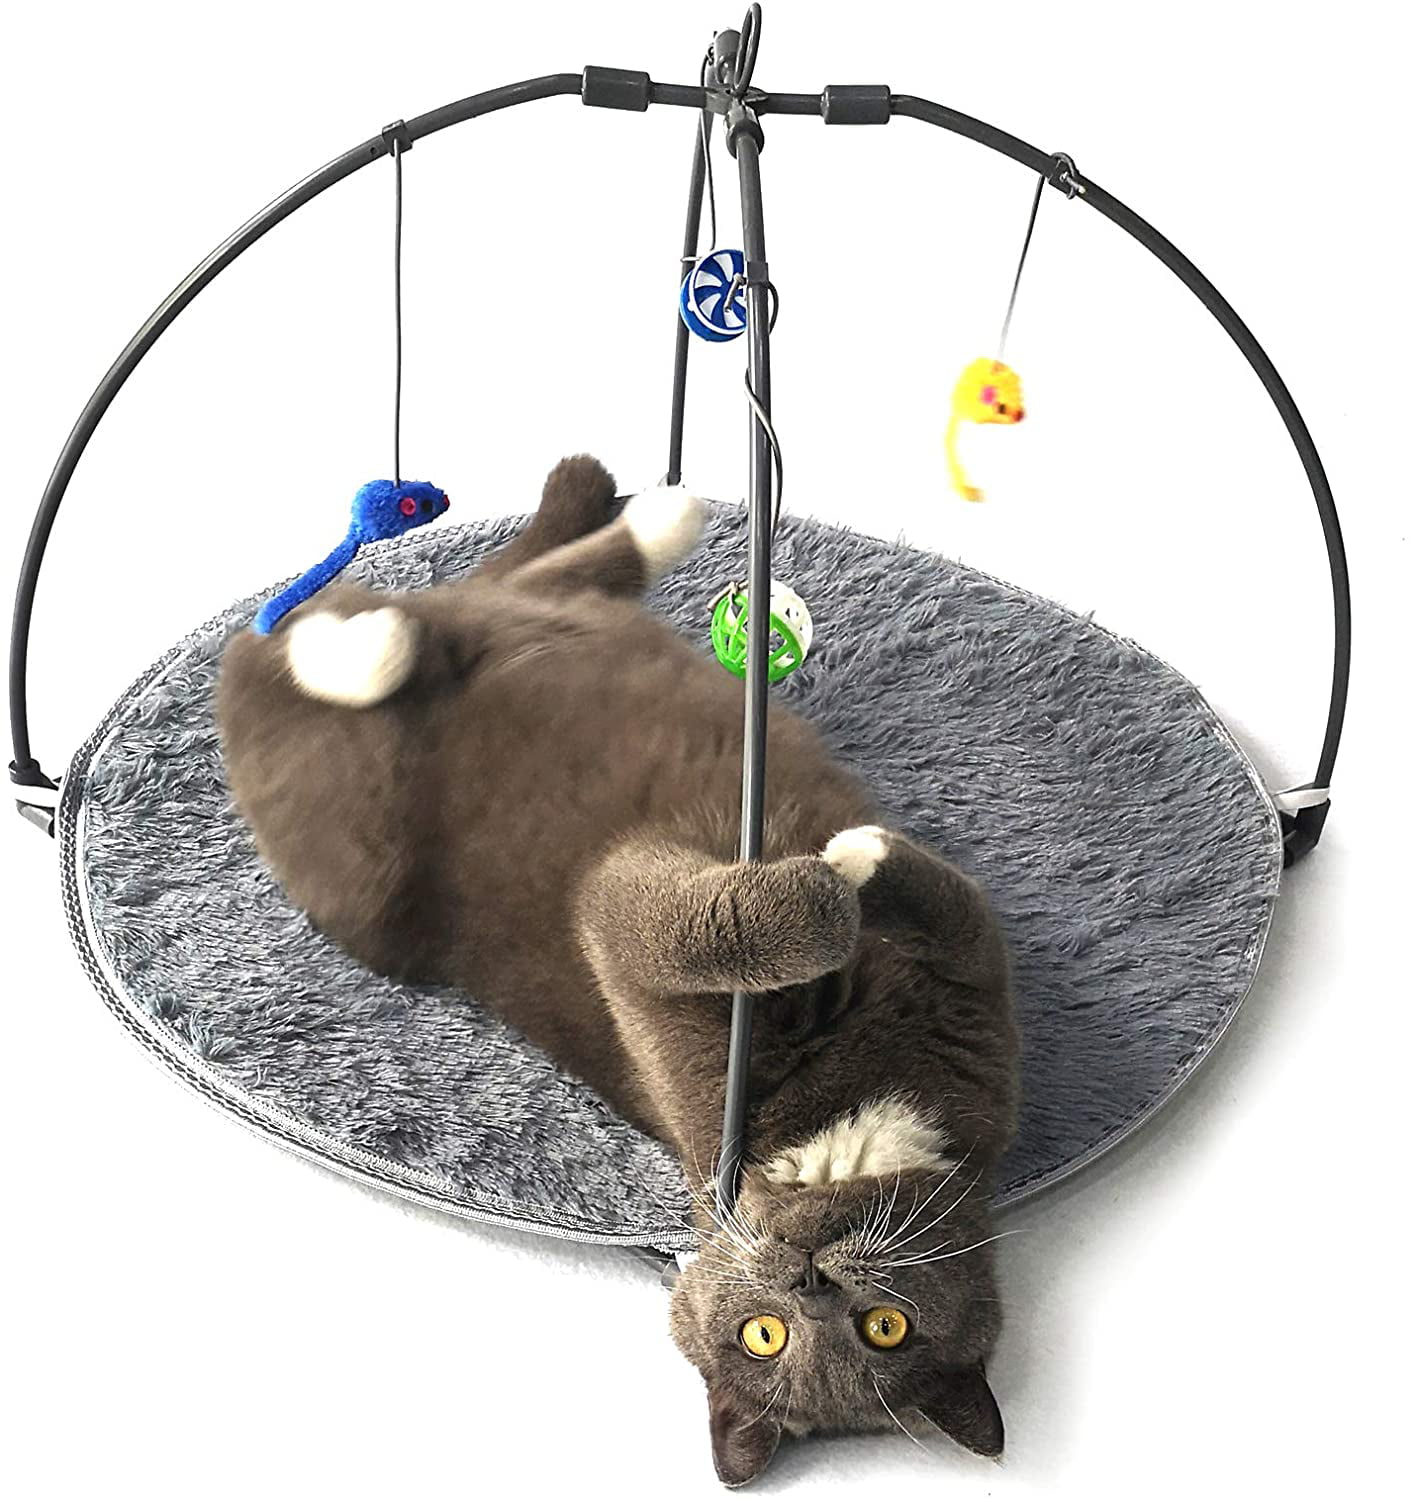 Lâ Vestmon Kitten Bed Multi-Function Pet Kitten Cat Interactive Activity Soft Fleece Folding Toy Mat Bed With Hanging Toys Bells Balls And Mice.